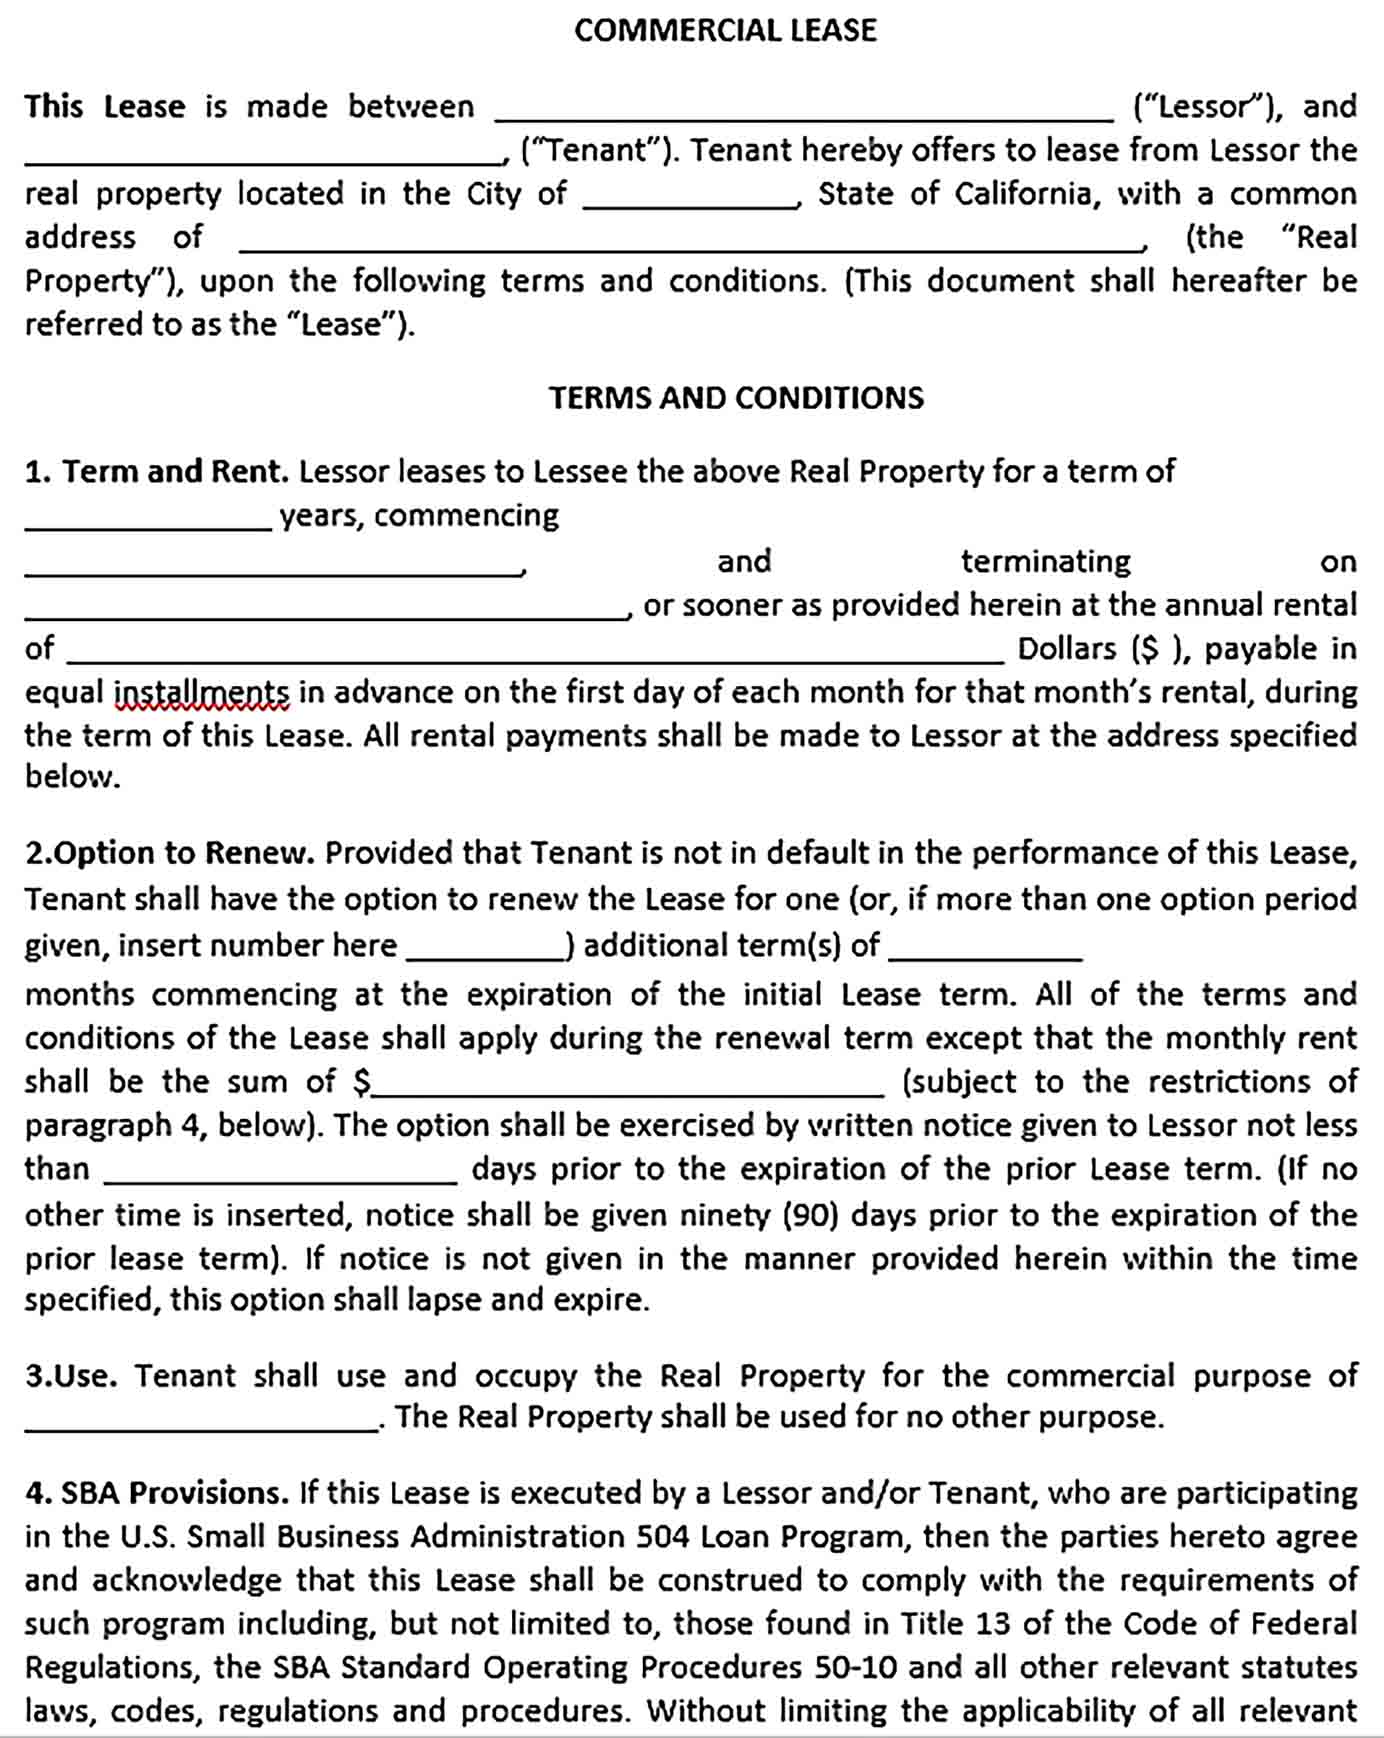 Sample Commercial Real Estate Lease Agreement